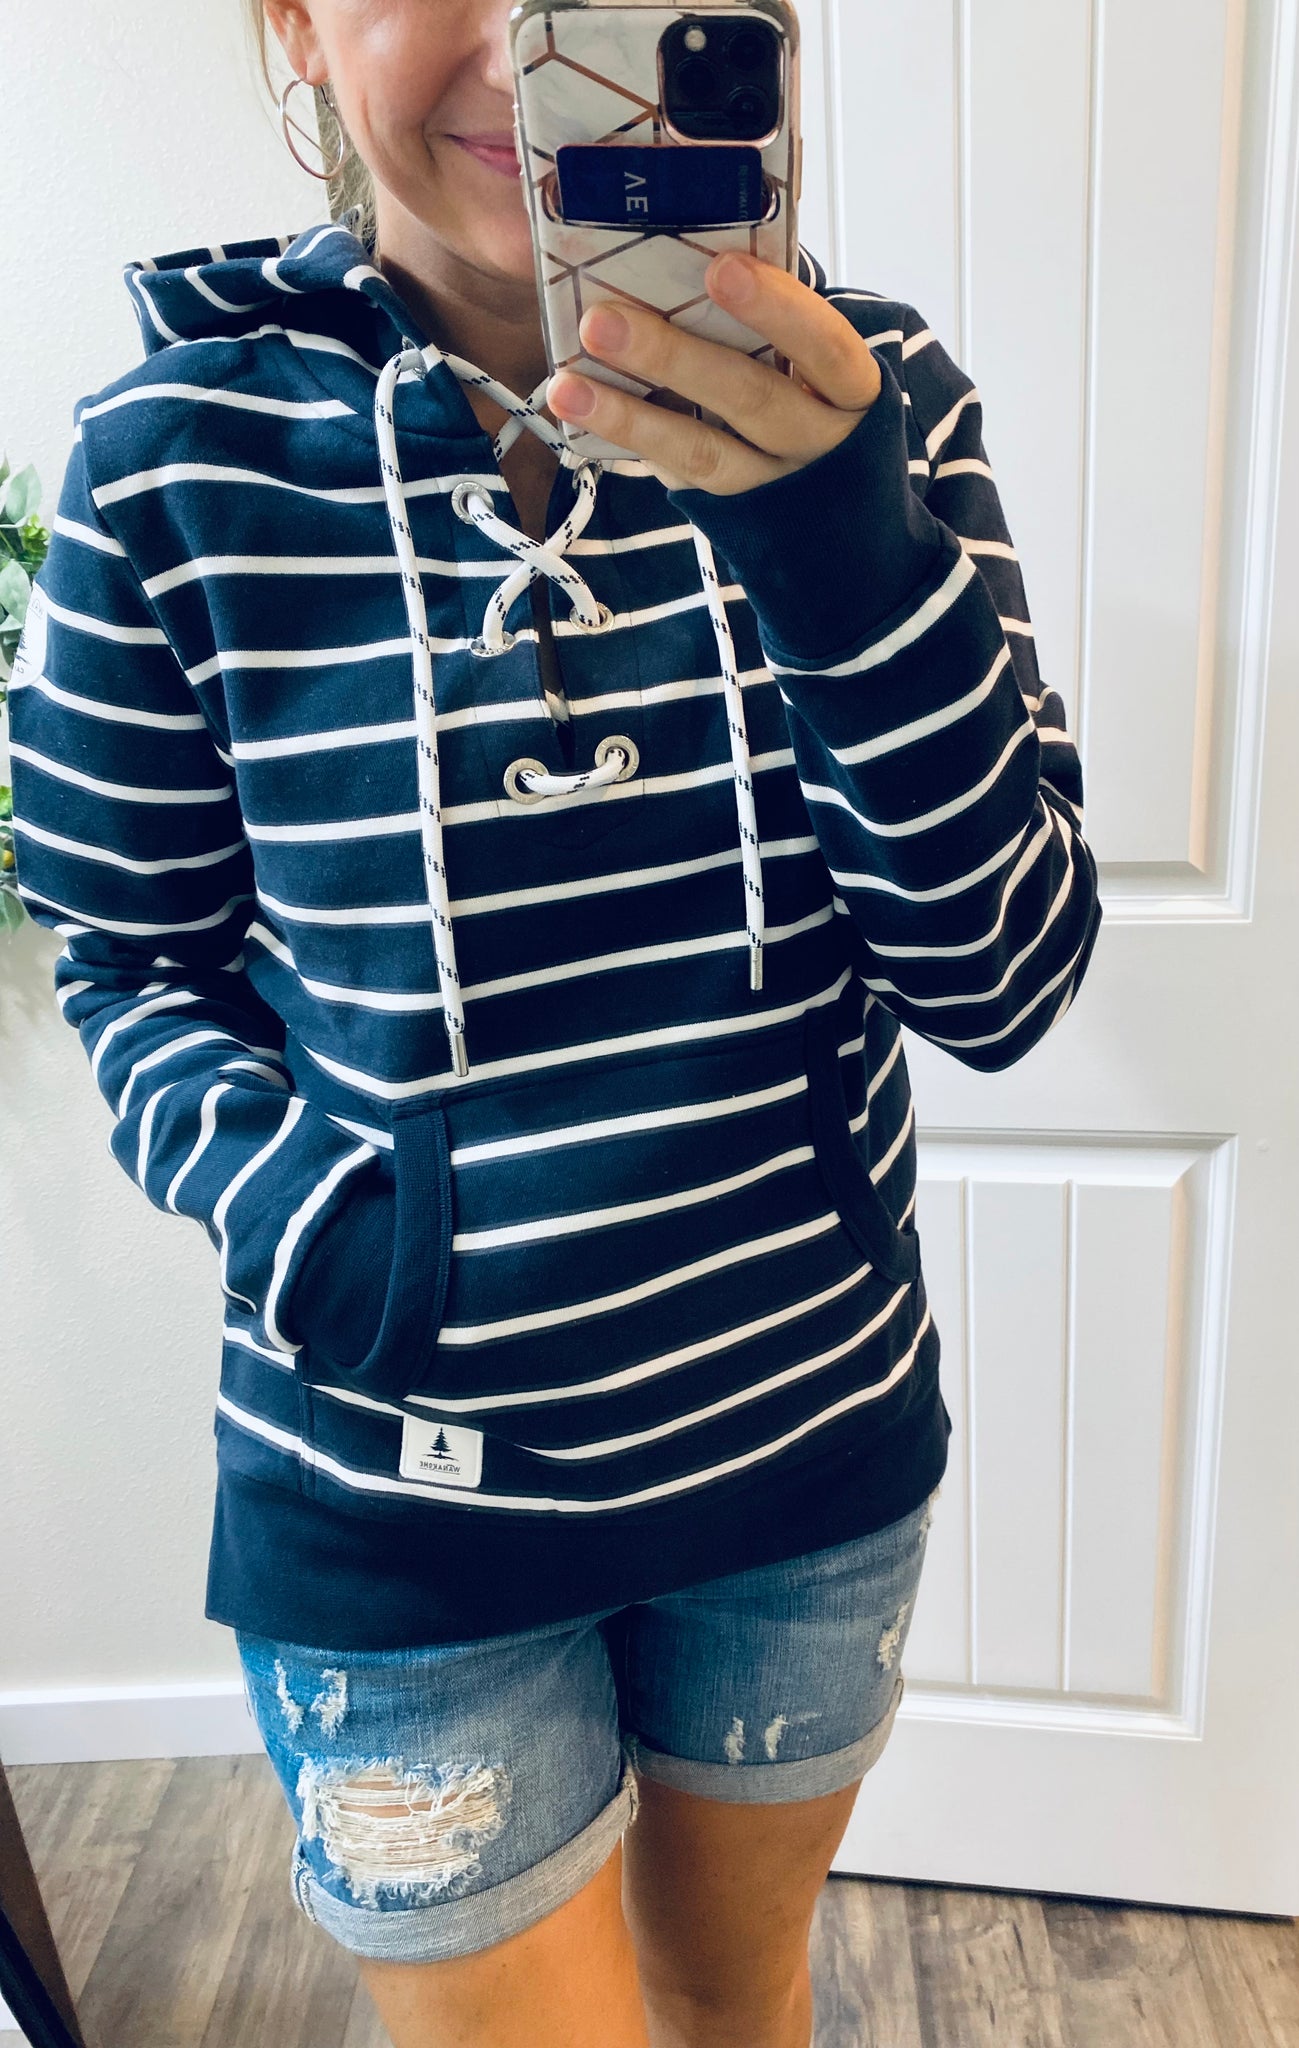 Preorder Wanakome Navy Striped Tie Up Hoodie (Included in SALE!)